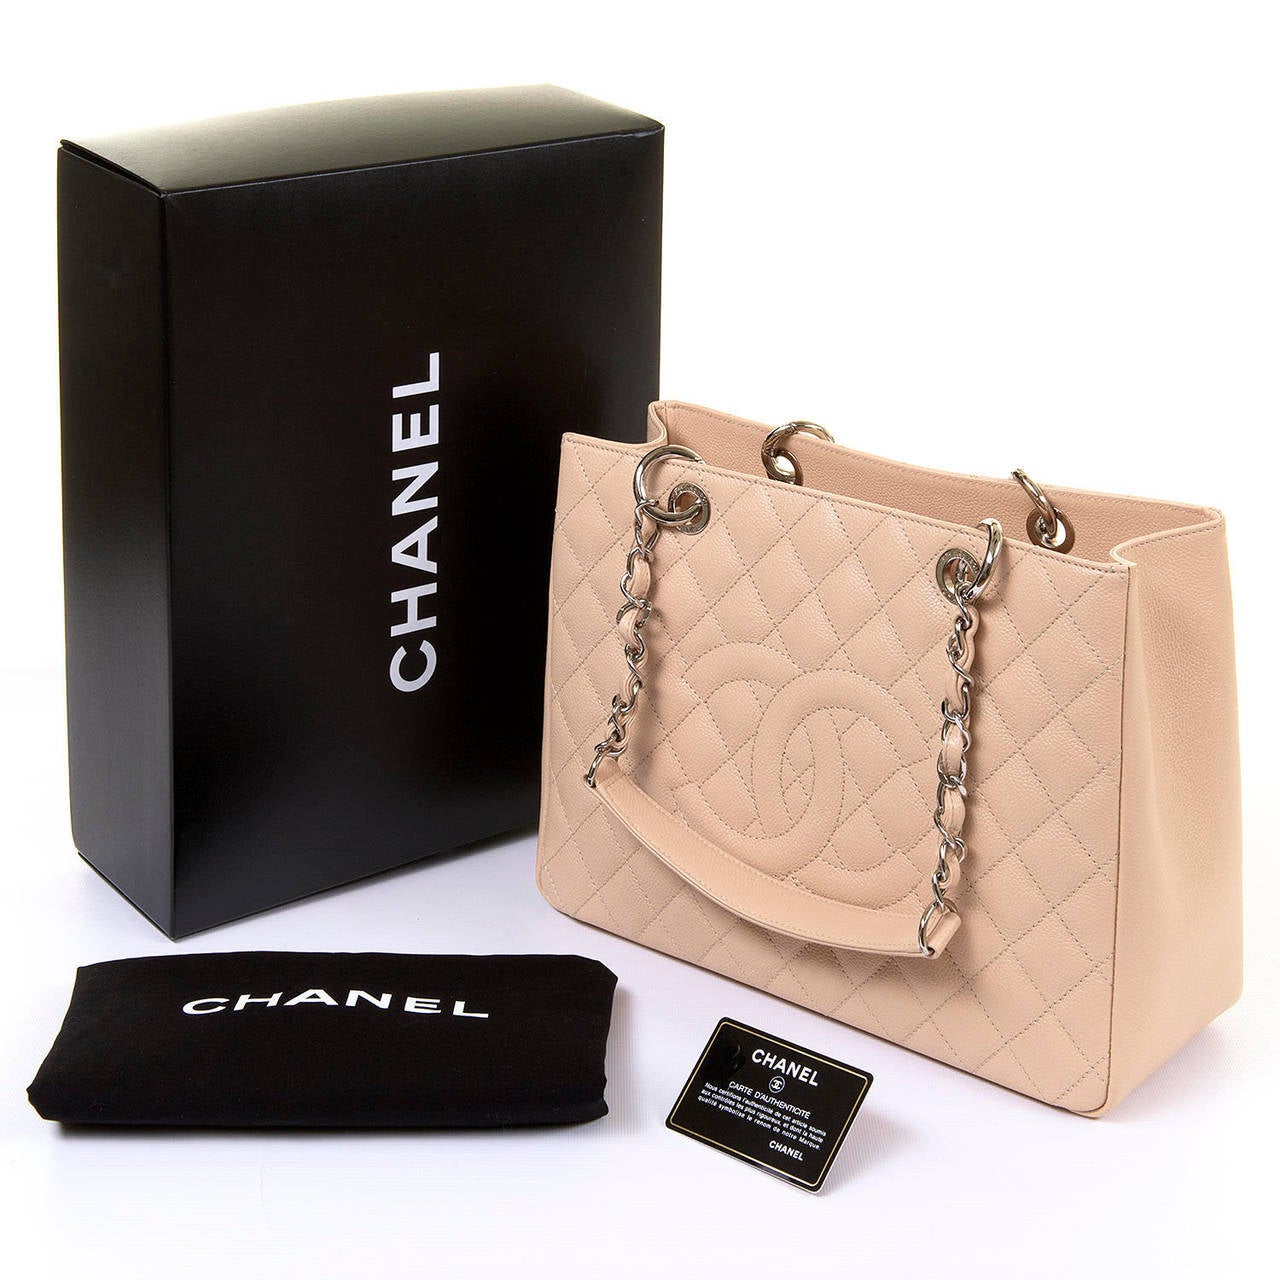 This gorgeous Chanel Shoulder bag is in pristine 'Store-fresh' condition, and comes complete with it's original Box, Dust Sack and Authenticity Card. The bag is finished in quilted Vanilla Caviar Leather with the iconic double 'C' logo embossed to